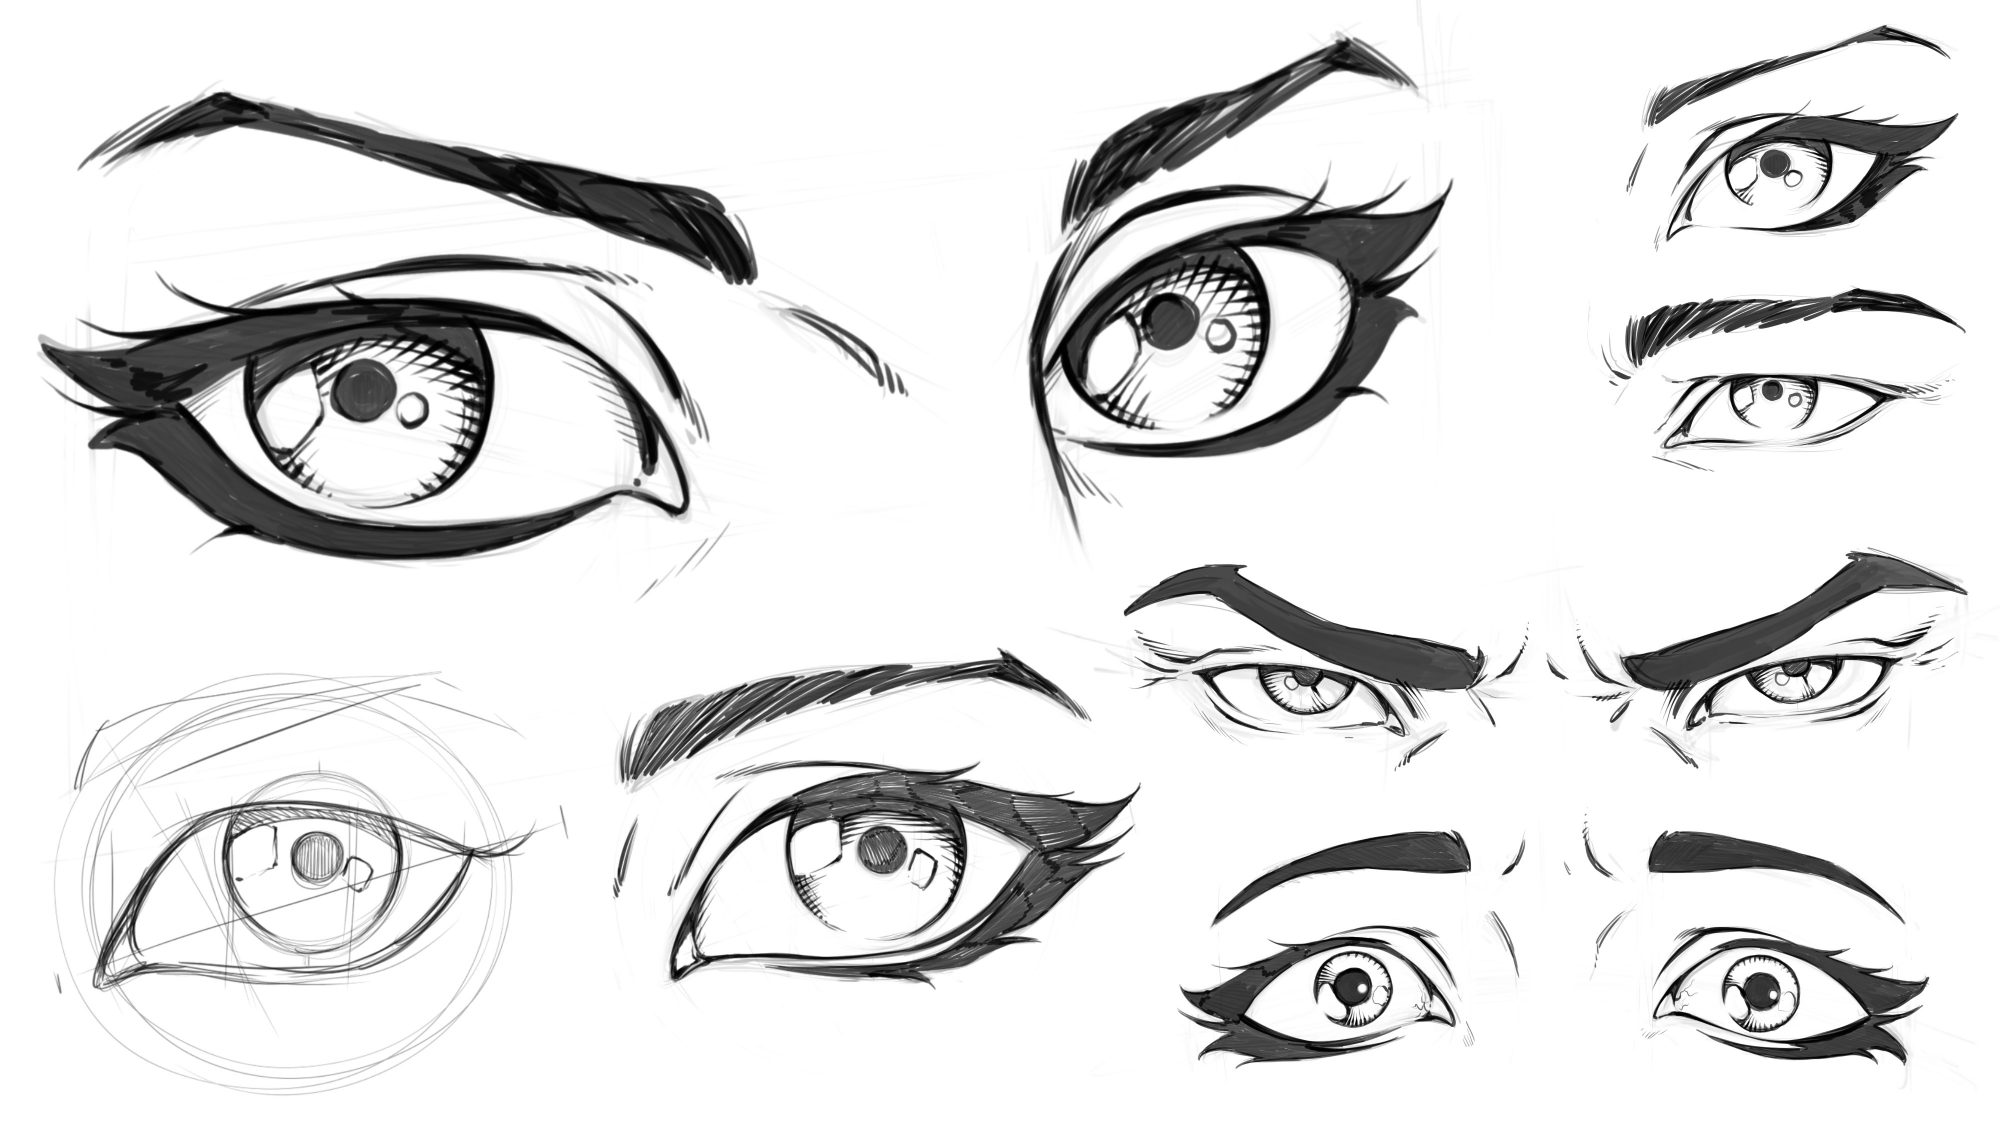 How to Draw Comic Style Eyes - Step by Step on Skillshare - Ram Studios